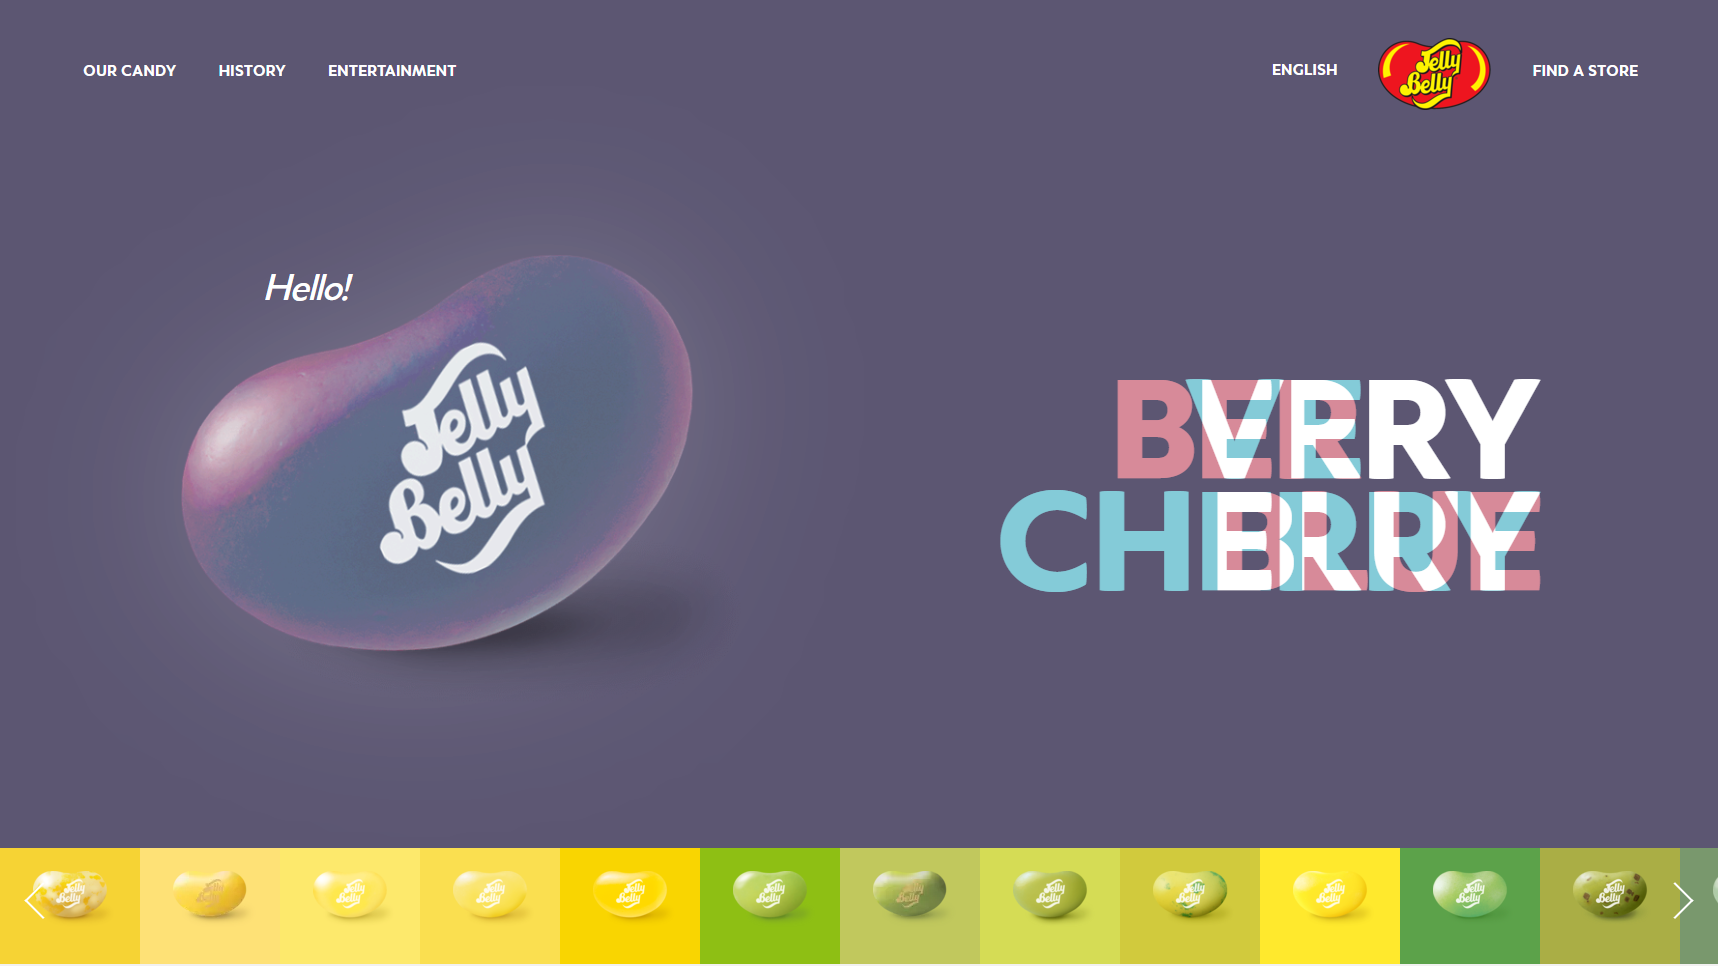 Jelly Belly Candy Company - Candy Manufacturer